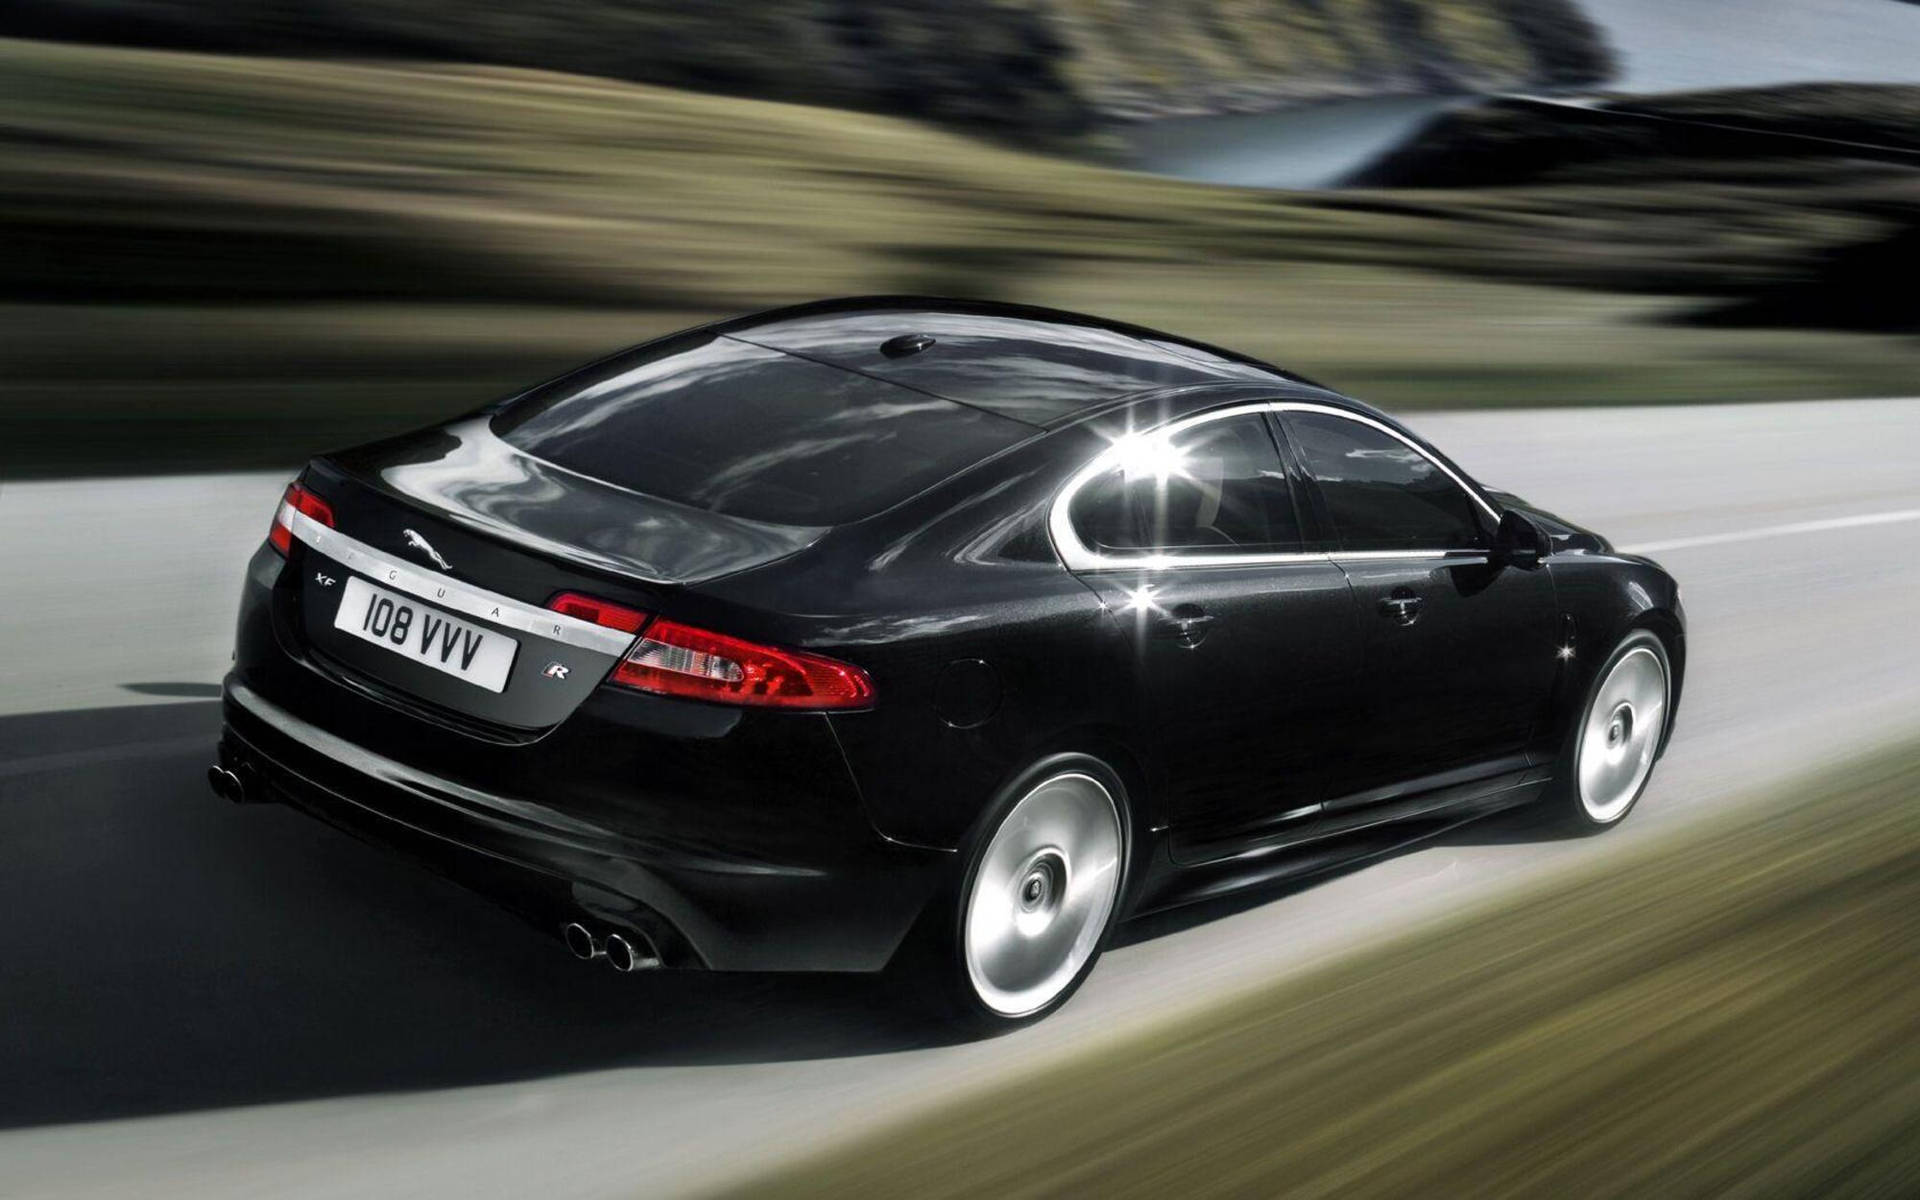 Experience Speed and Luxury with the Black Jaguar Car Wallpaper